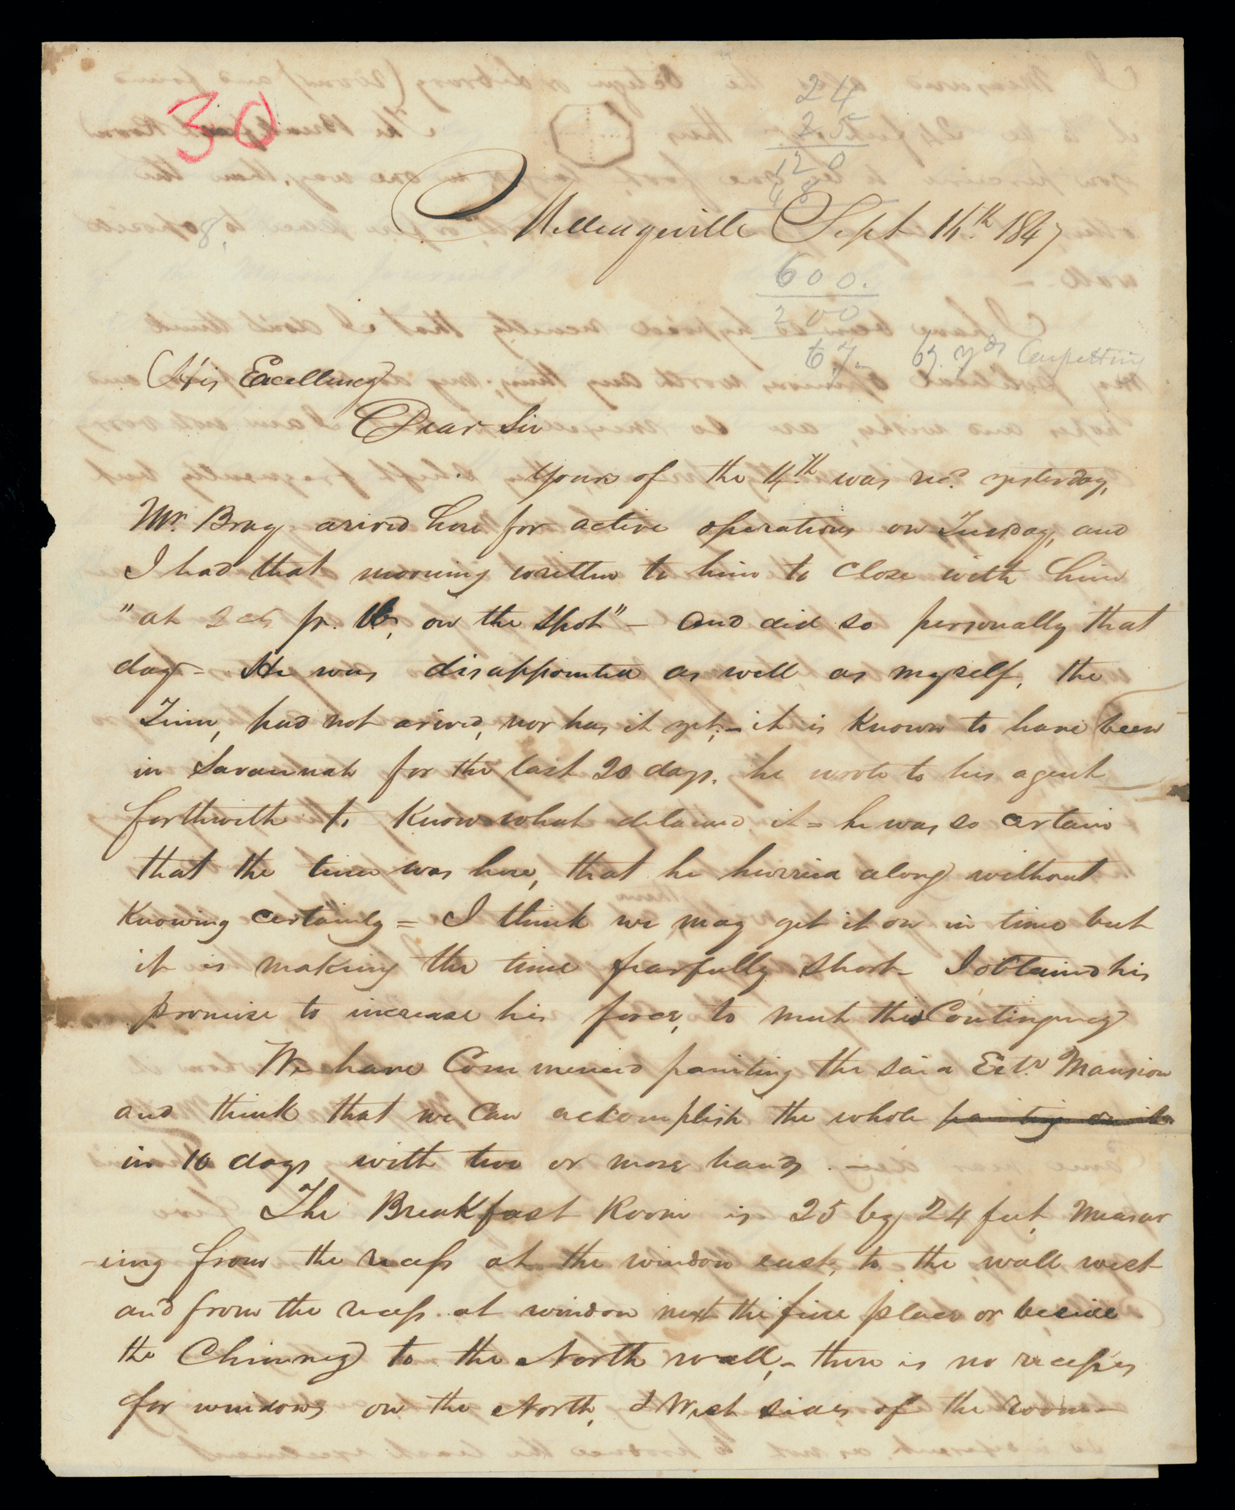 Letter, A. W. Redding, Milledgeville, Georgia, to His Excellency Geo[rge] W. Crawford, Bel-air, Georgia, Page 1